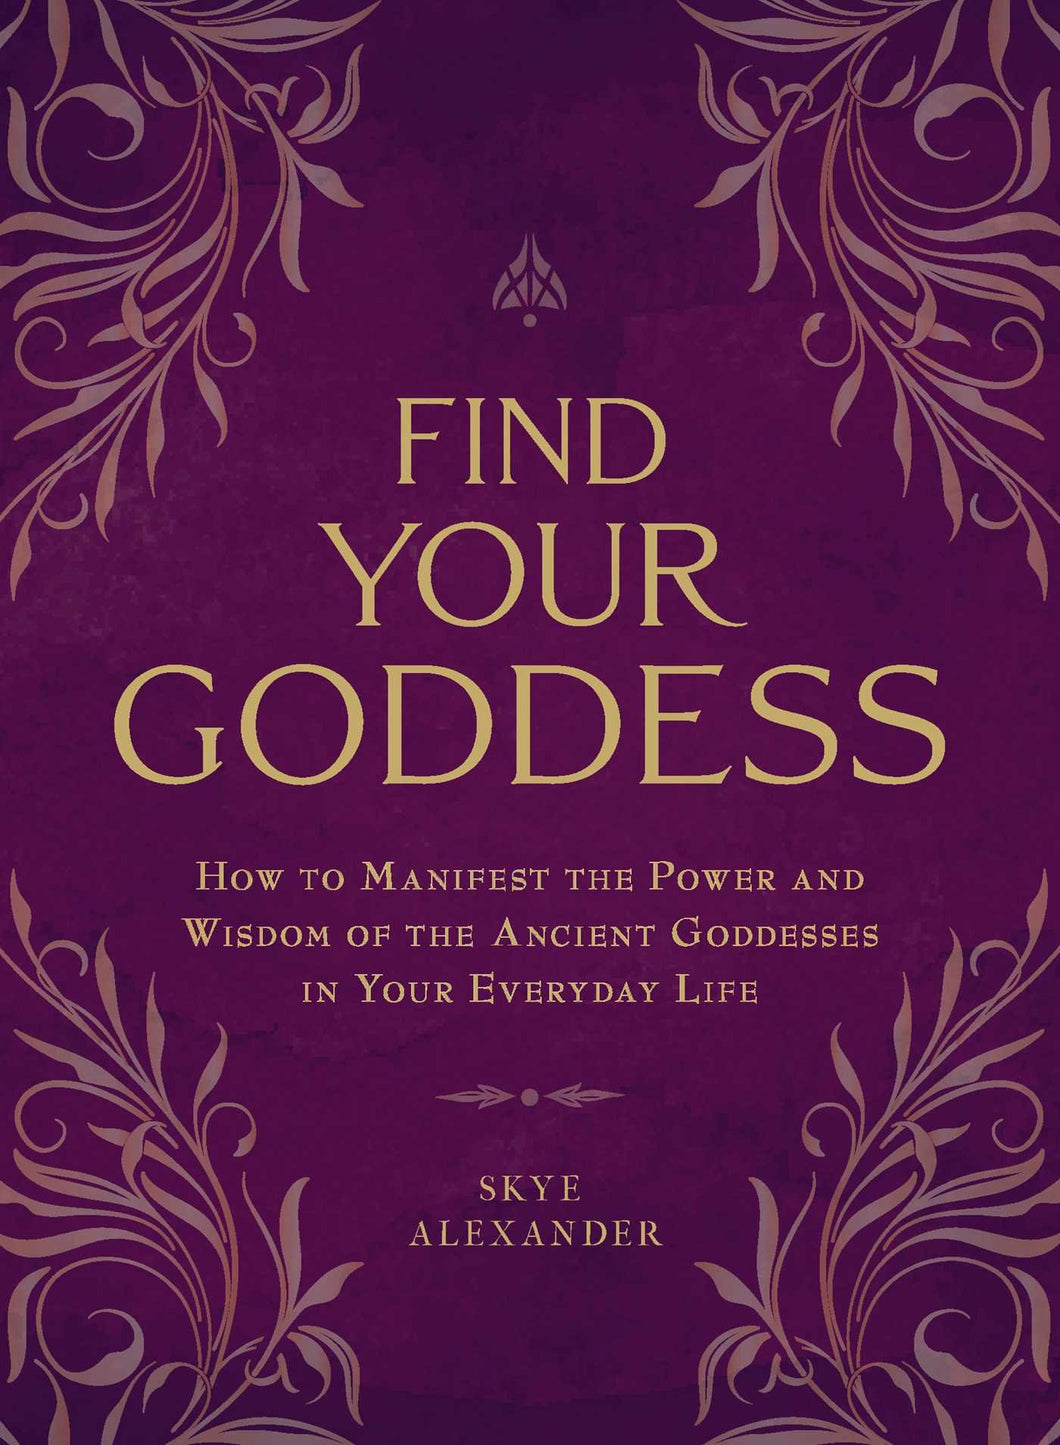 Find Your Goddess: How to Manifest the Power and Wisdom of the Ancient Goddesses in Your Everyday Life by Skye Alexander